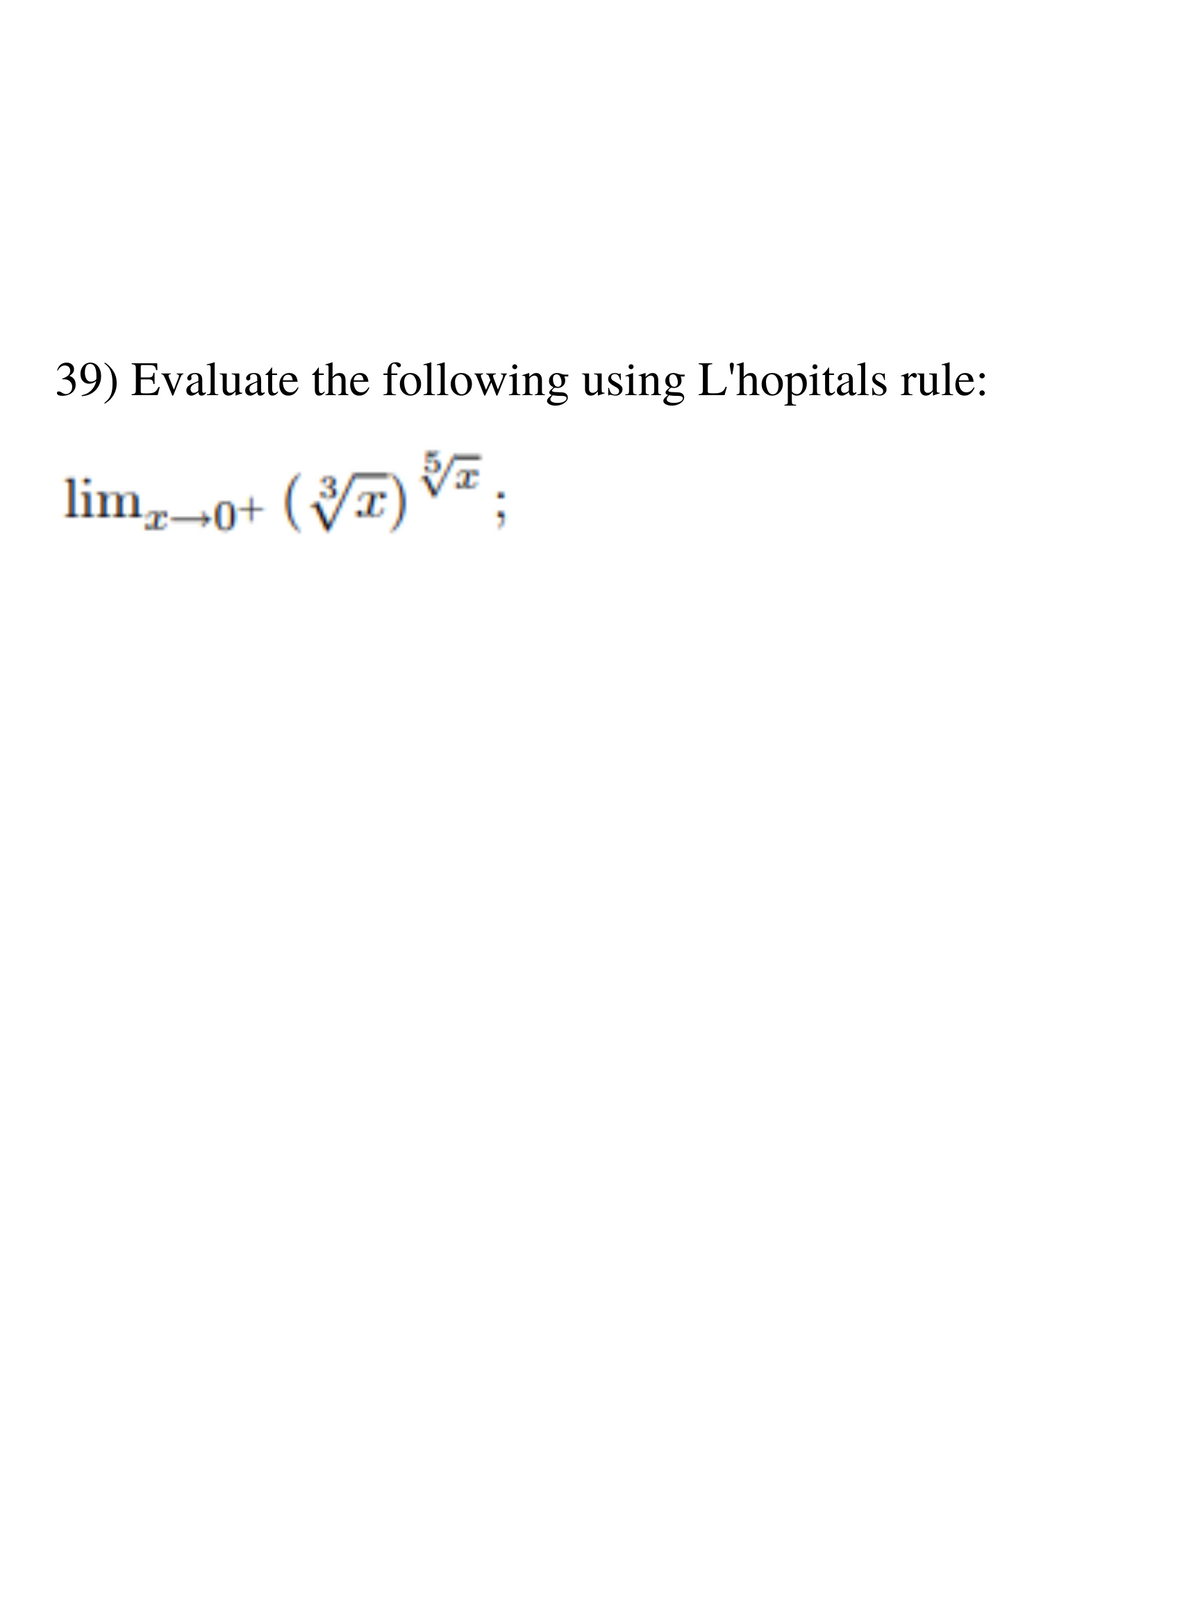 39) Evaluate the following using L'hopitals rule:
limx→0+ (VT) VT;